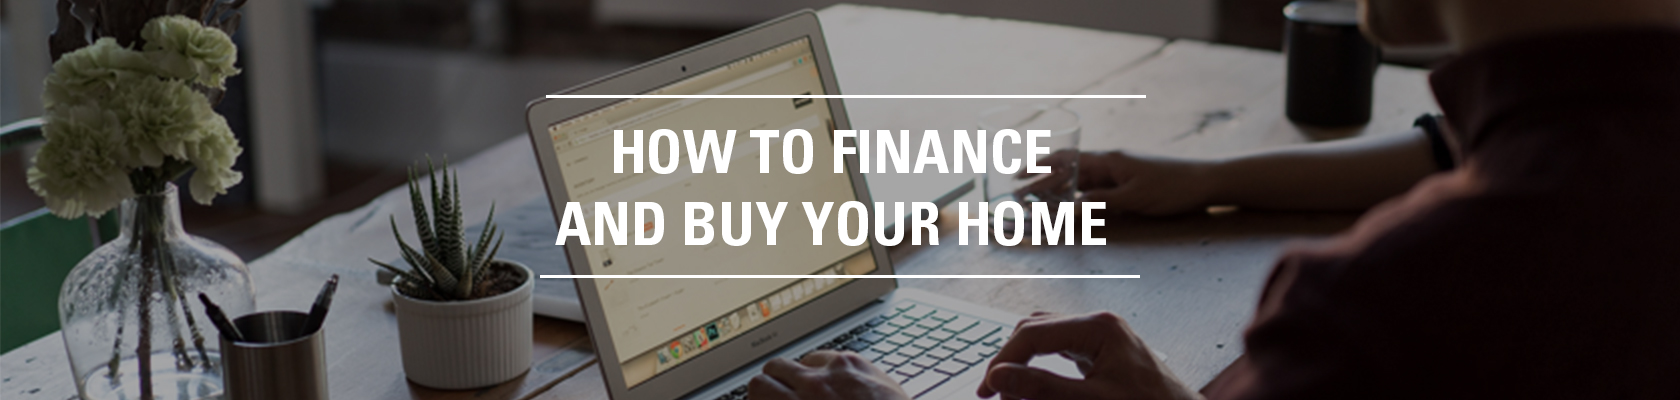 Golden Bay how to finance and buy your home